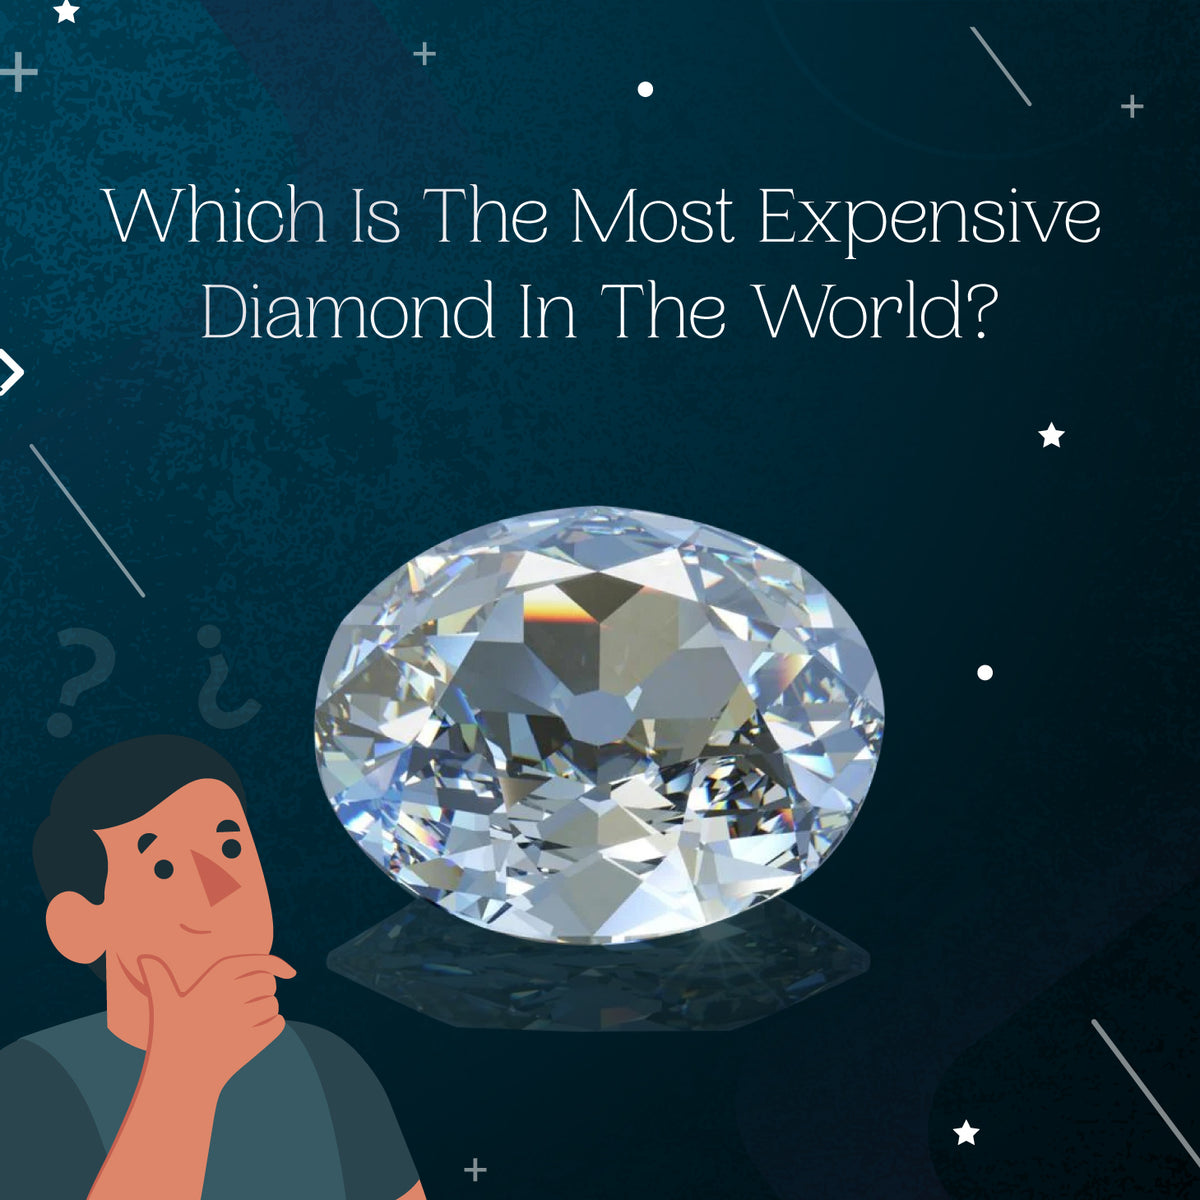 Koh-i-Noor: The most famous diamond in the world